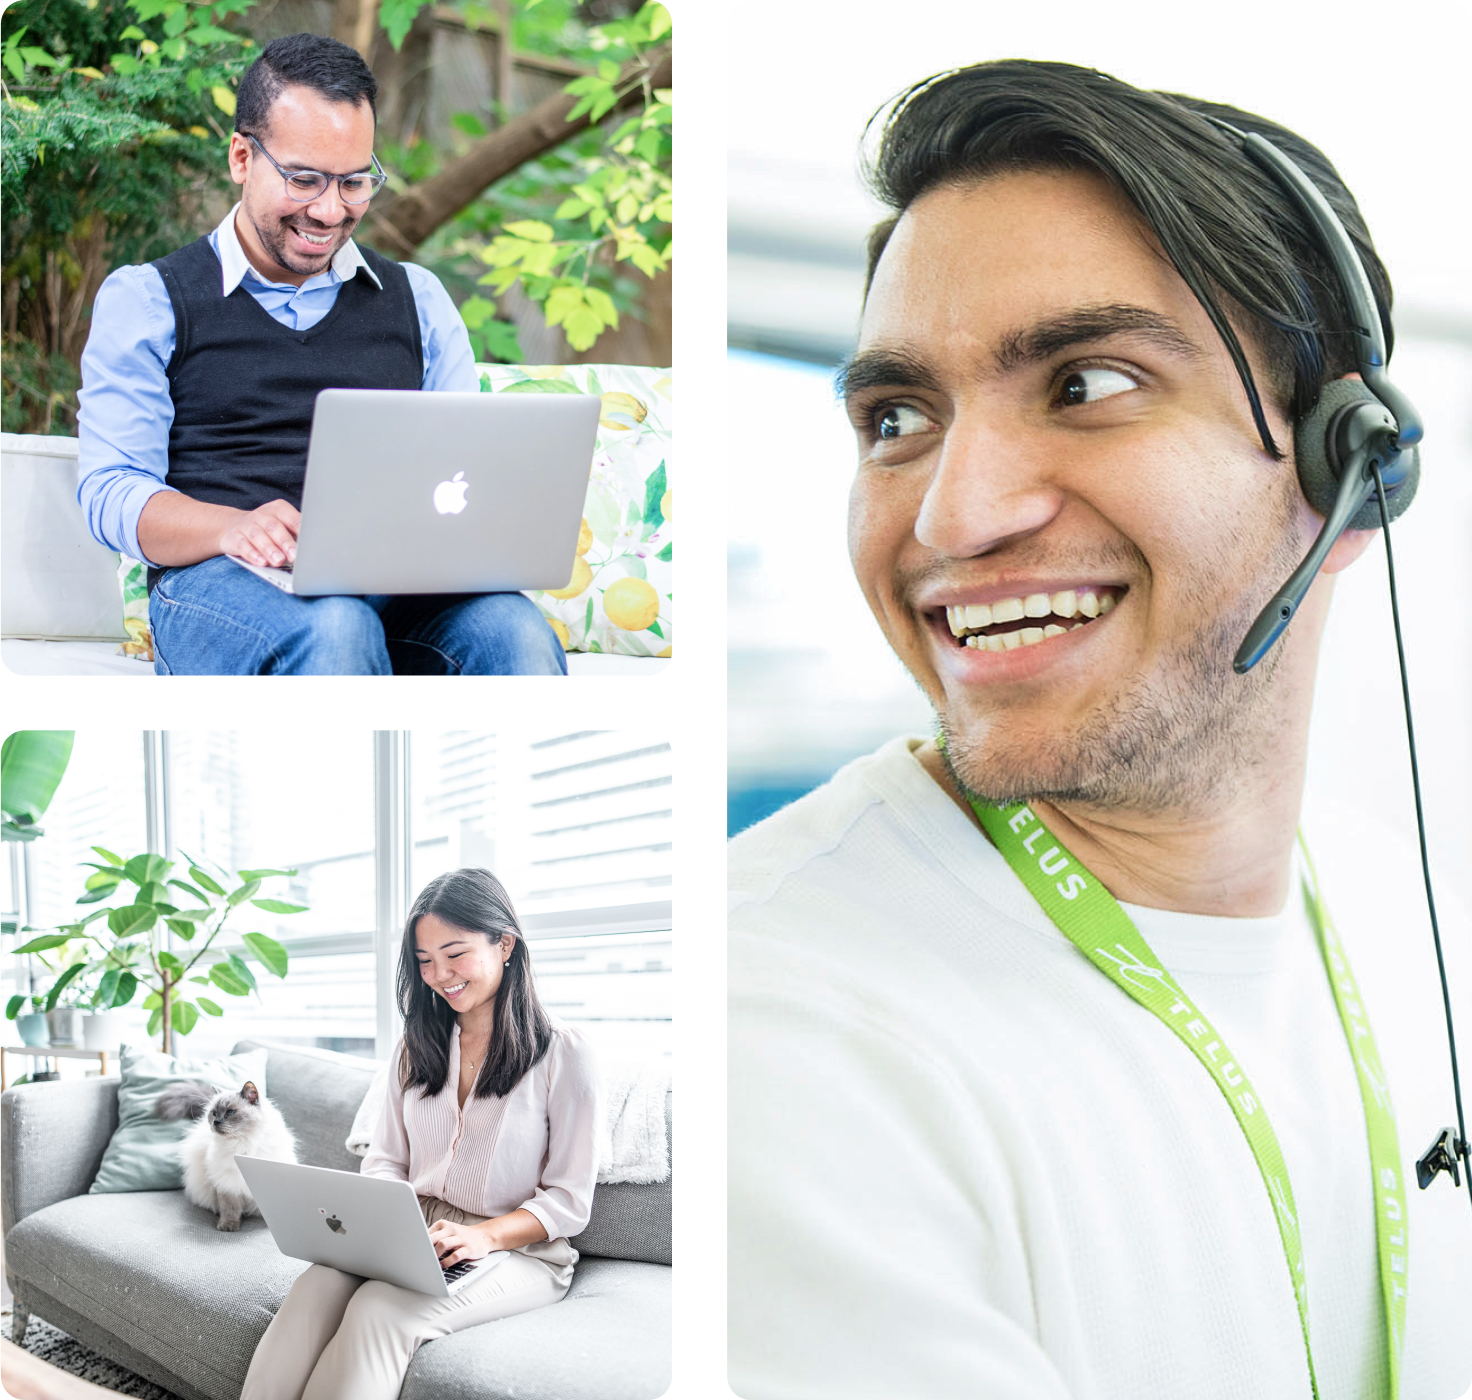 A collage depicting TELUS team members at work